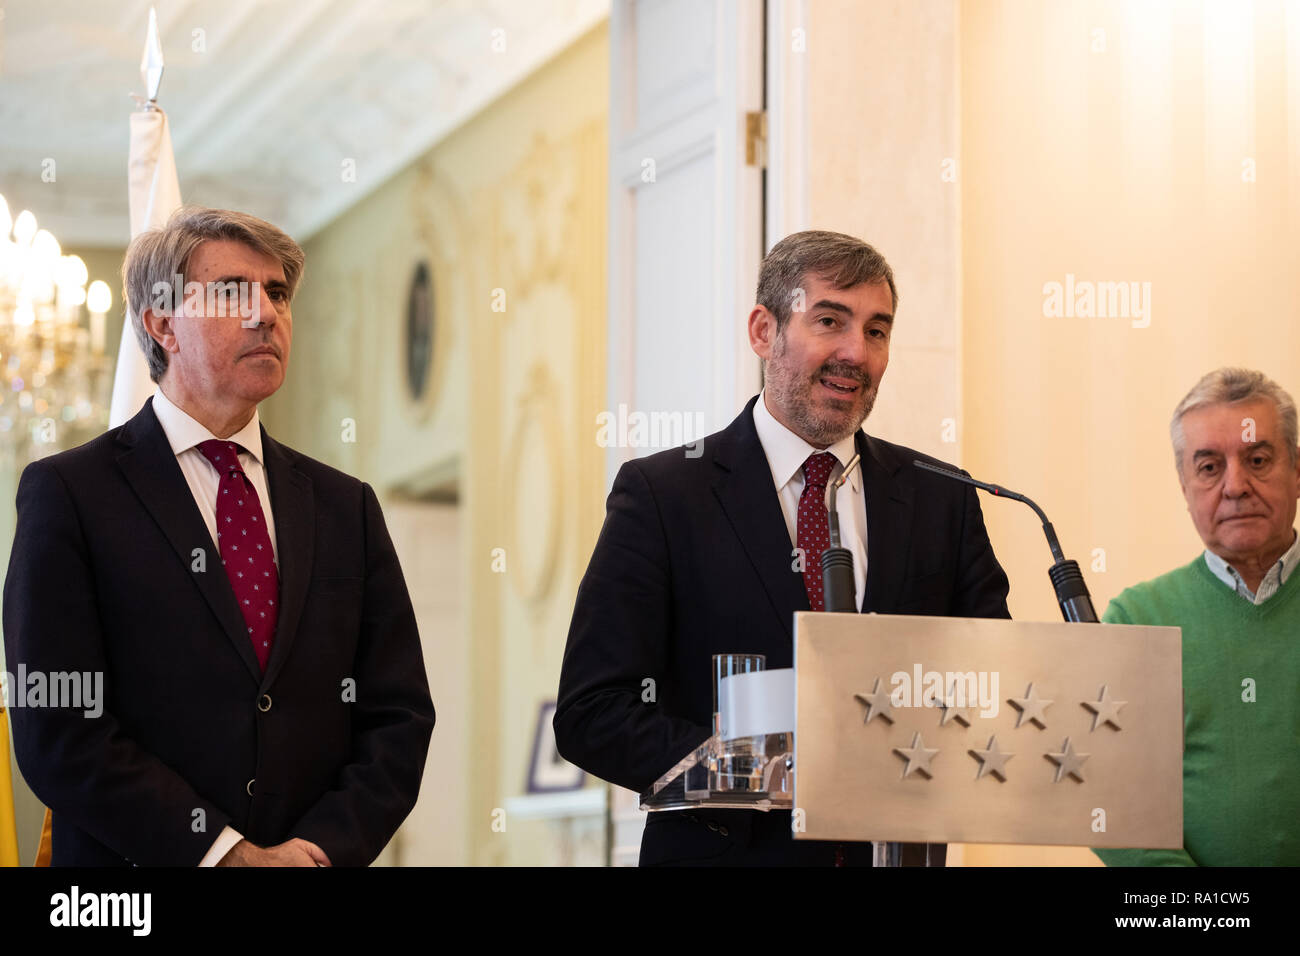 Madrid, Spain. 30th December 2018. ANGEL GARRIDO(left), The President of the Community of Madrid, FERNANDO CLAVIJO, The President of the Community of the Canary Islands and JESUS LOPEZ, watchmaker of Puerta del Sol. The president of the Community of Madrid, Ángel Garrido, has met with his Canarian counterpart, Fernando Clavijo, to review the latest preparations for the New Year bells, which tomorrow will offer the clock of Puerta del Sol and this year will sound also in the Canary spindle on Dec 30, 2018 in Madrid, Spain Credit: Jesús Hellin/Alamy Live News Stock Photo